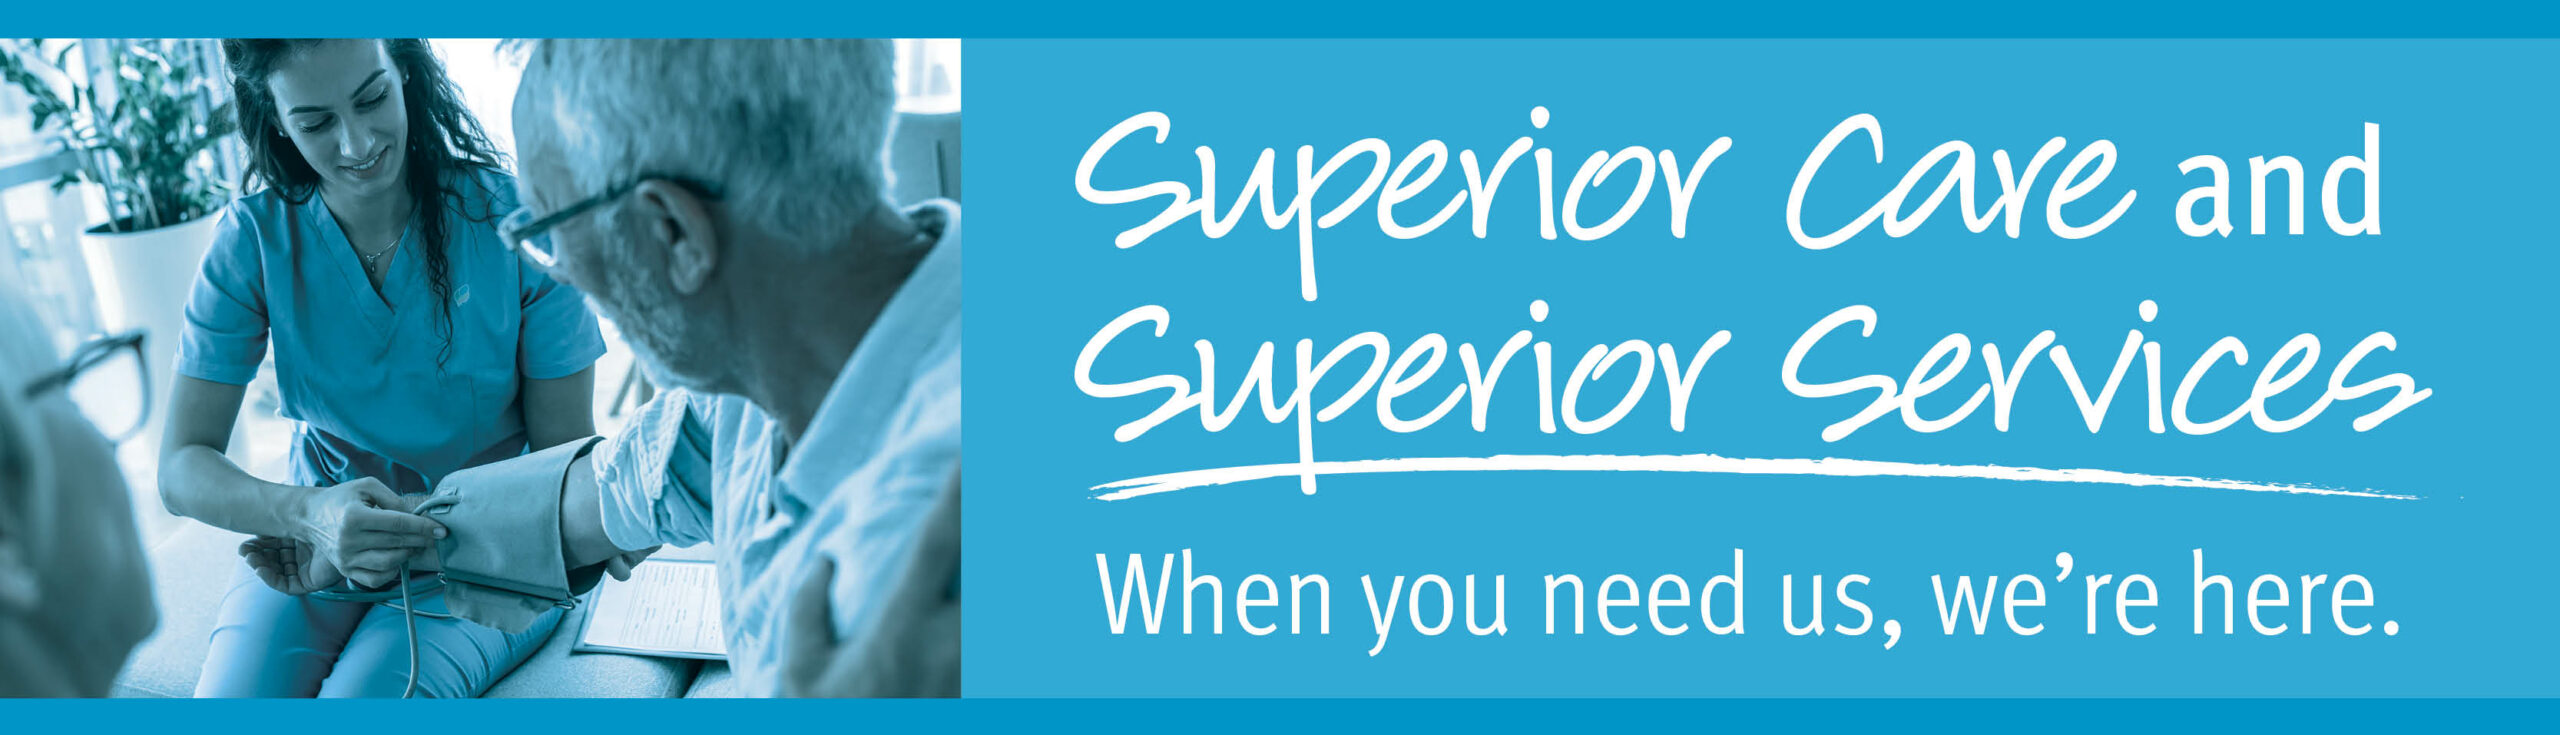 Superior Care and Superior Services. When you need us, we're here.